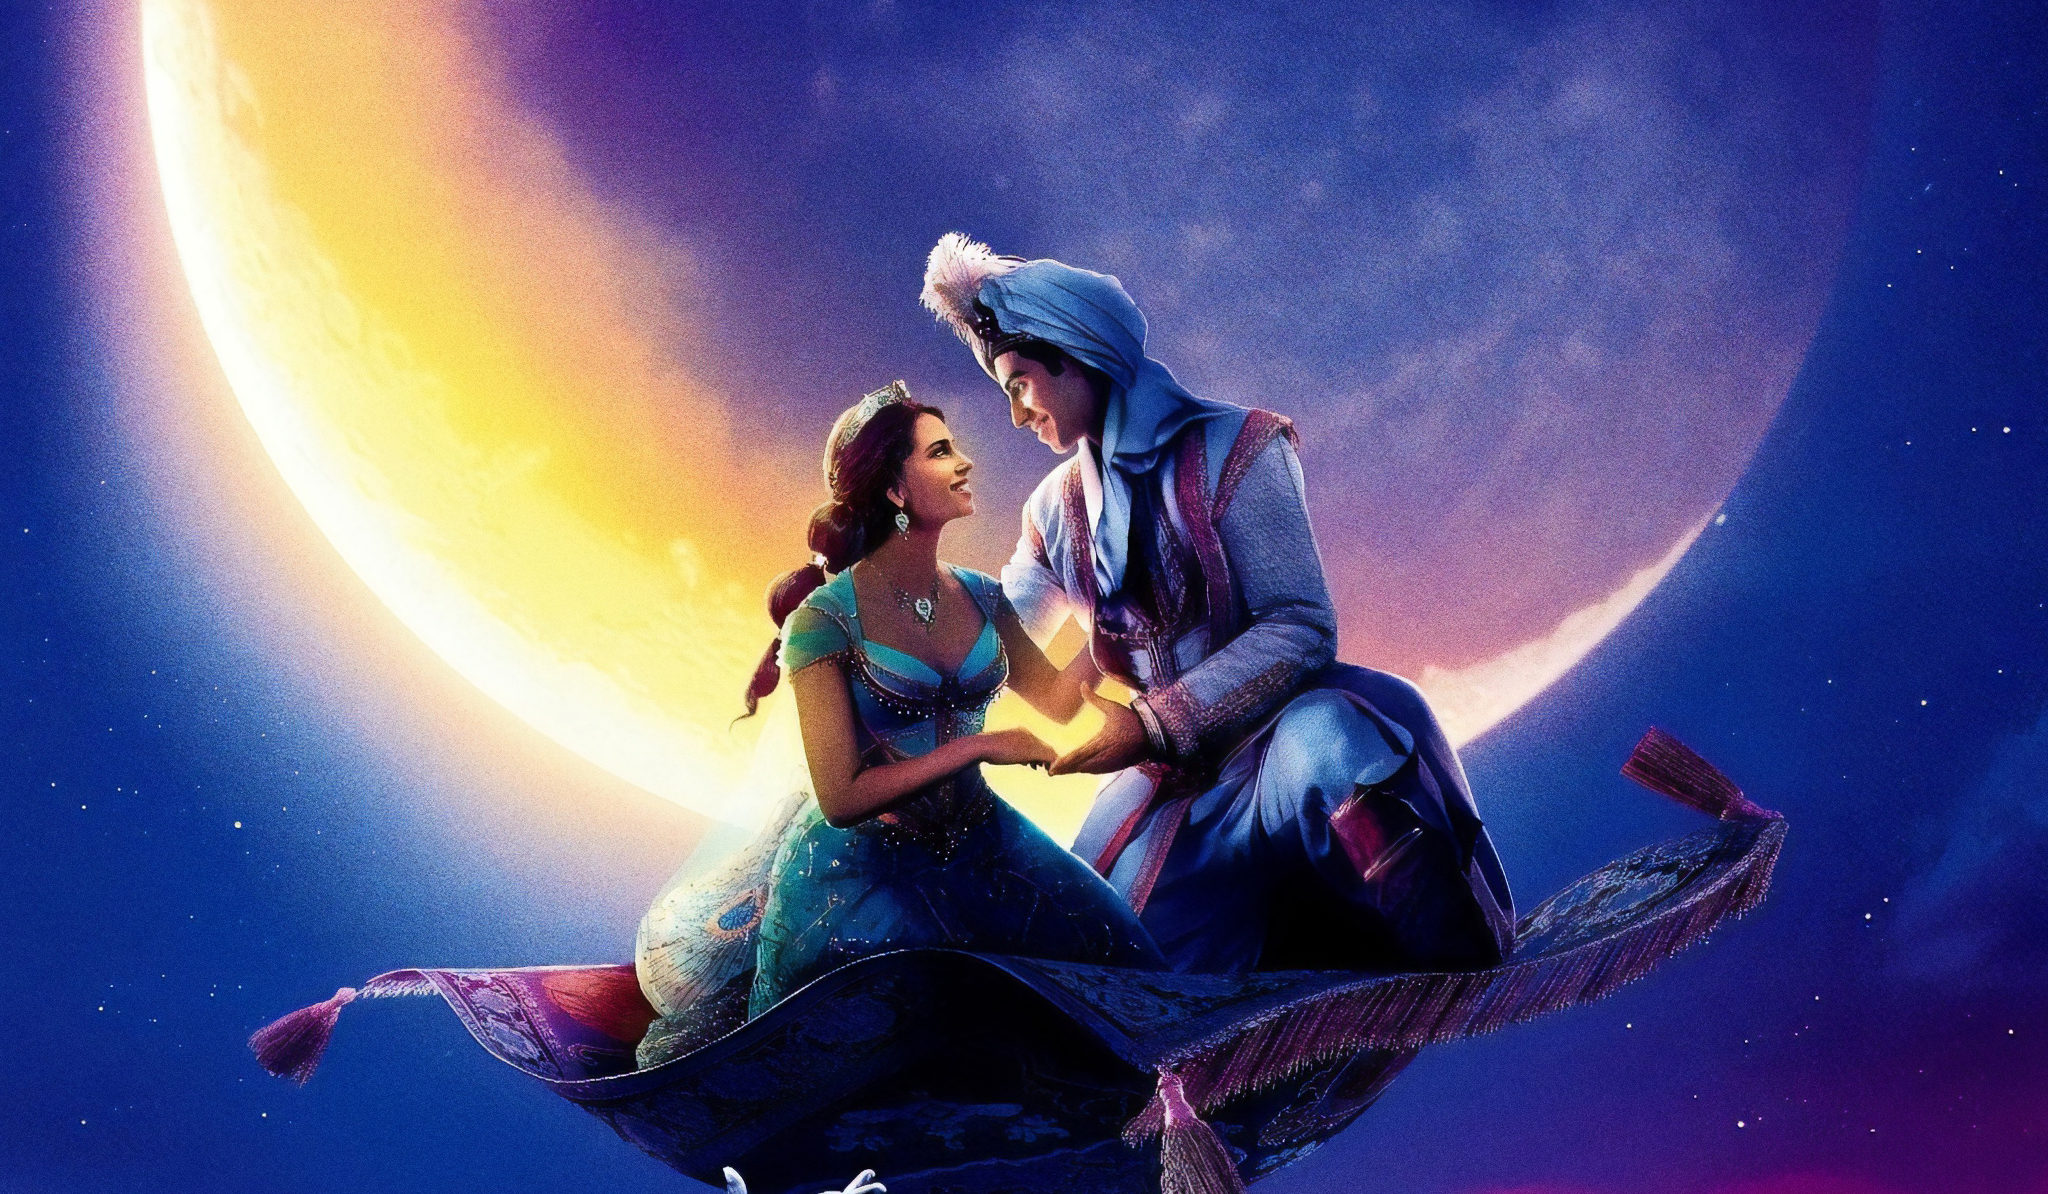 Aladdin 2019 Movie Poster Wallpapers | HD Wallpapers